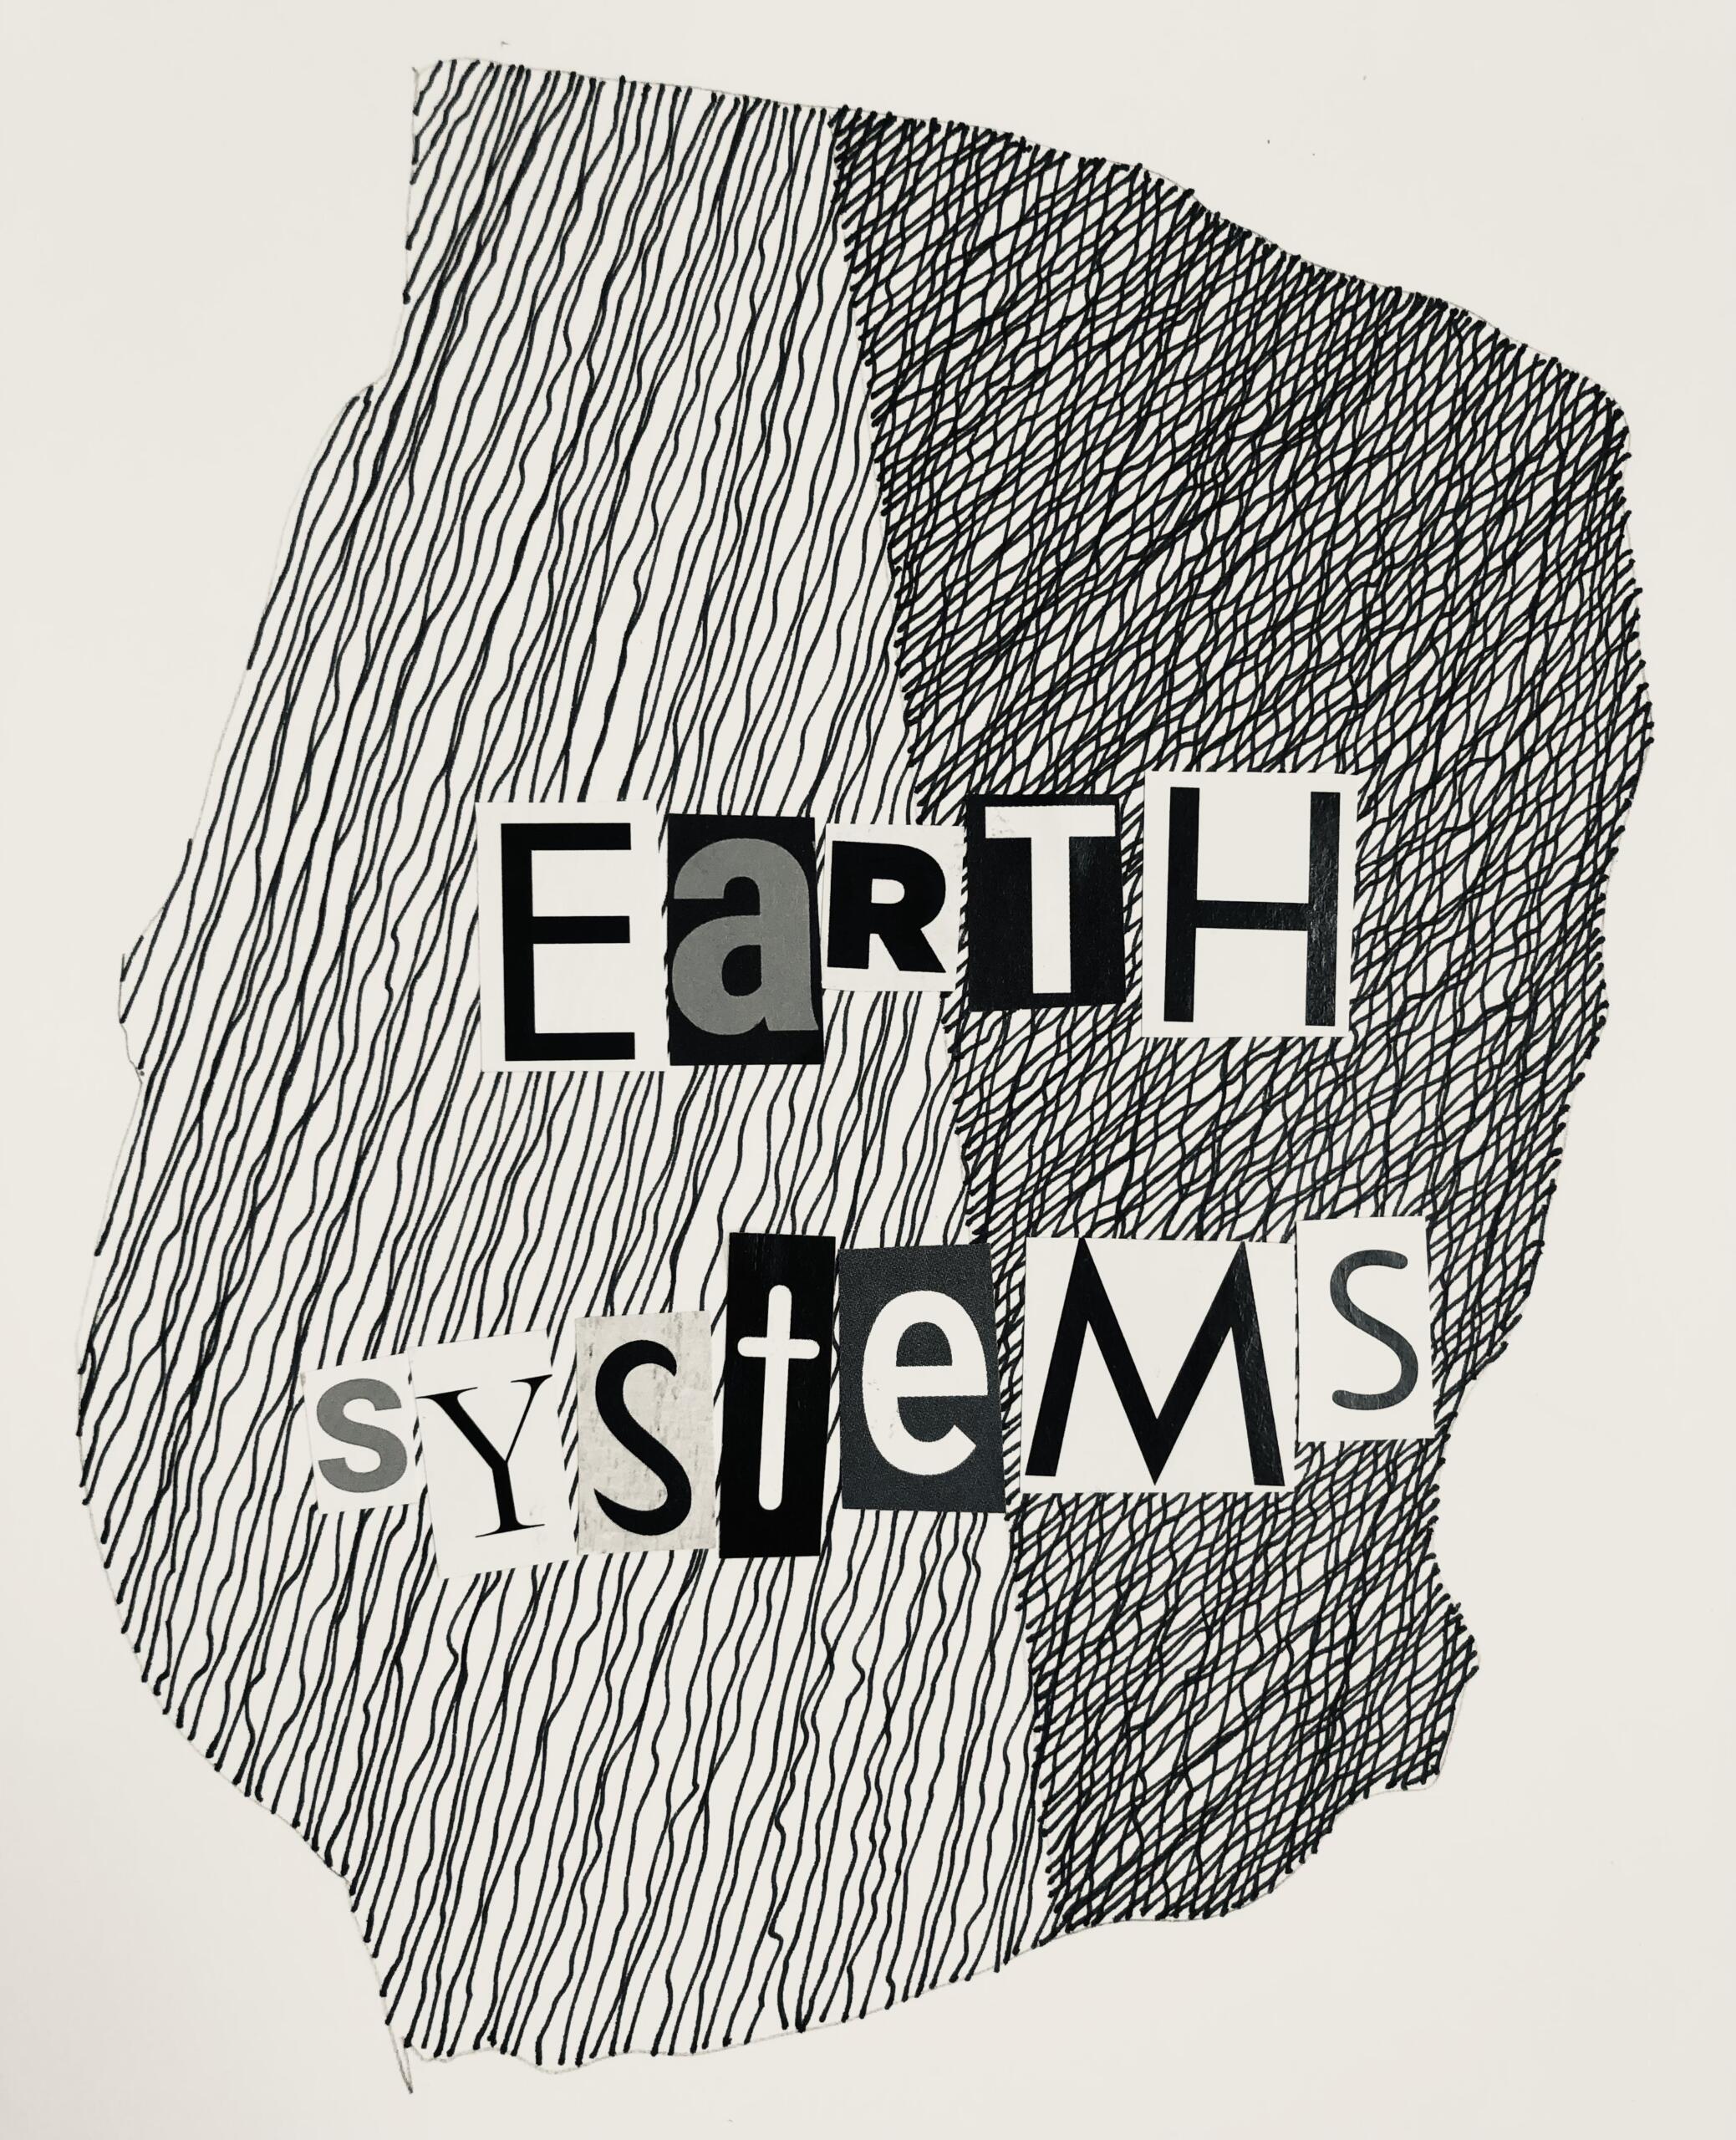 An abstract drawing of circles and lines, with letters cut in various styles collaged over that reads "earth systems"